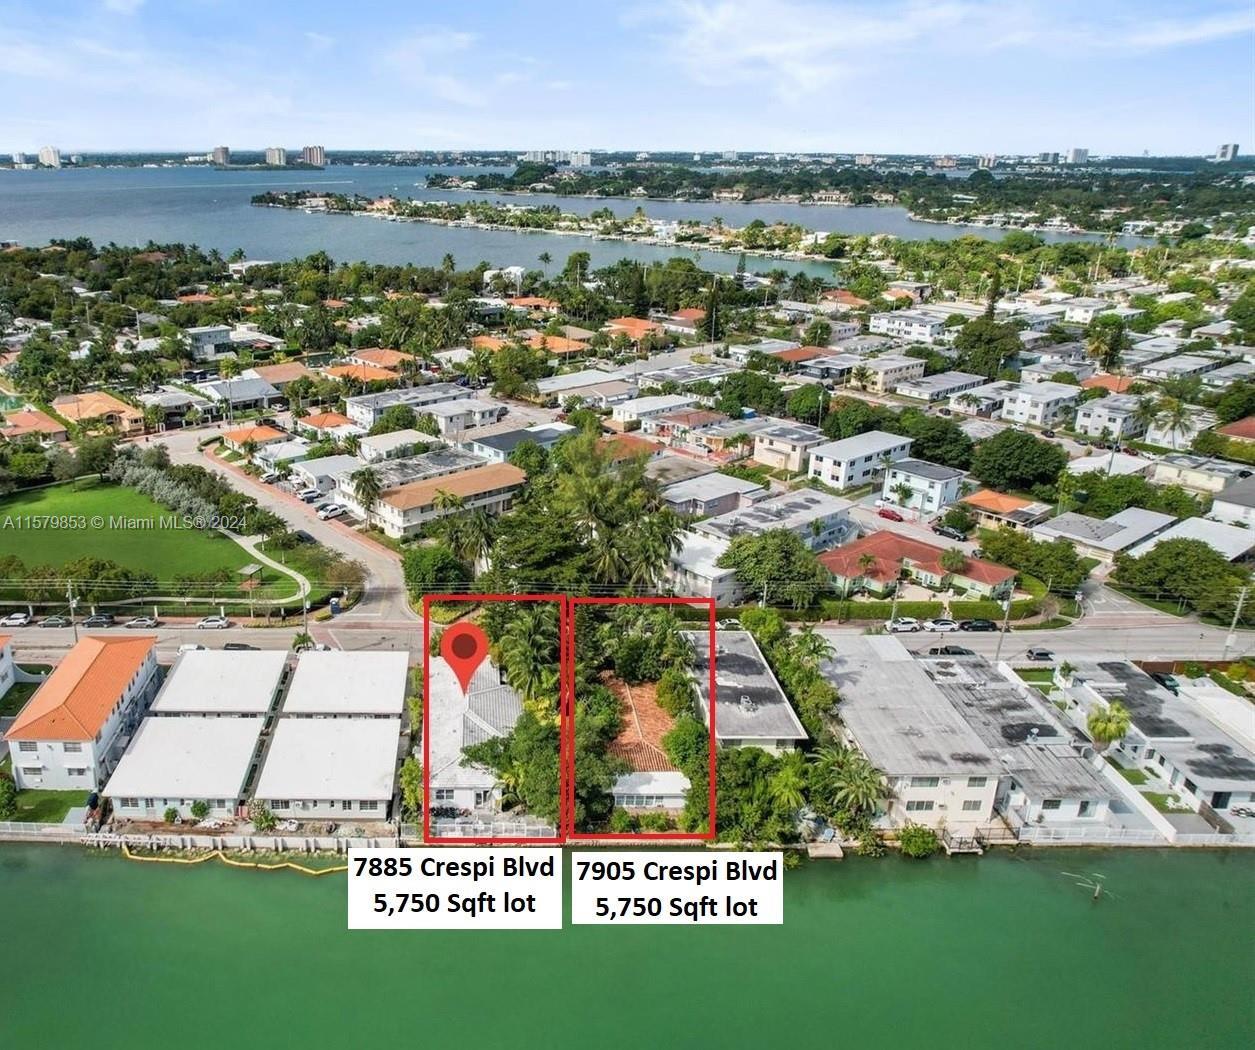 Amazing opportunity to own a waterfront duplex plus a studio in non-gated Biscayne Point. CAP Rate 3